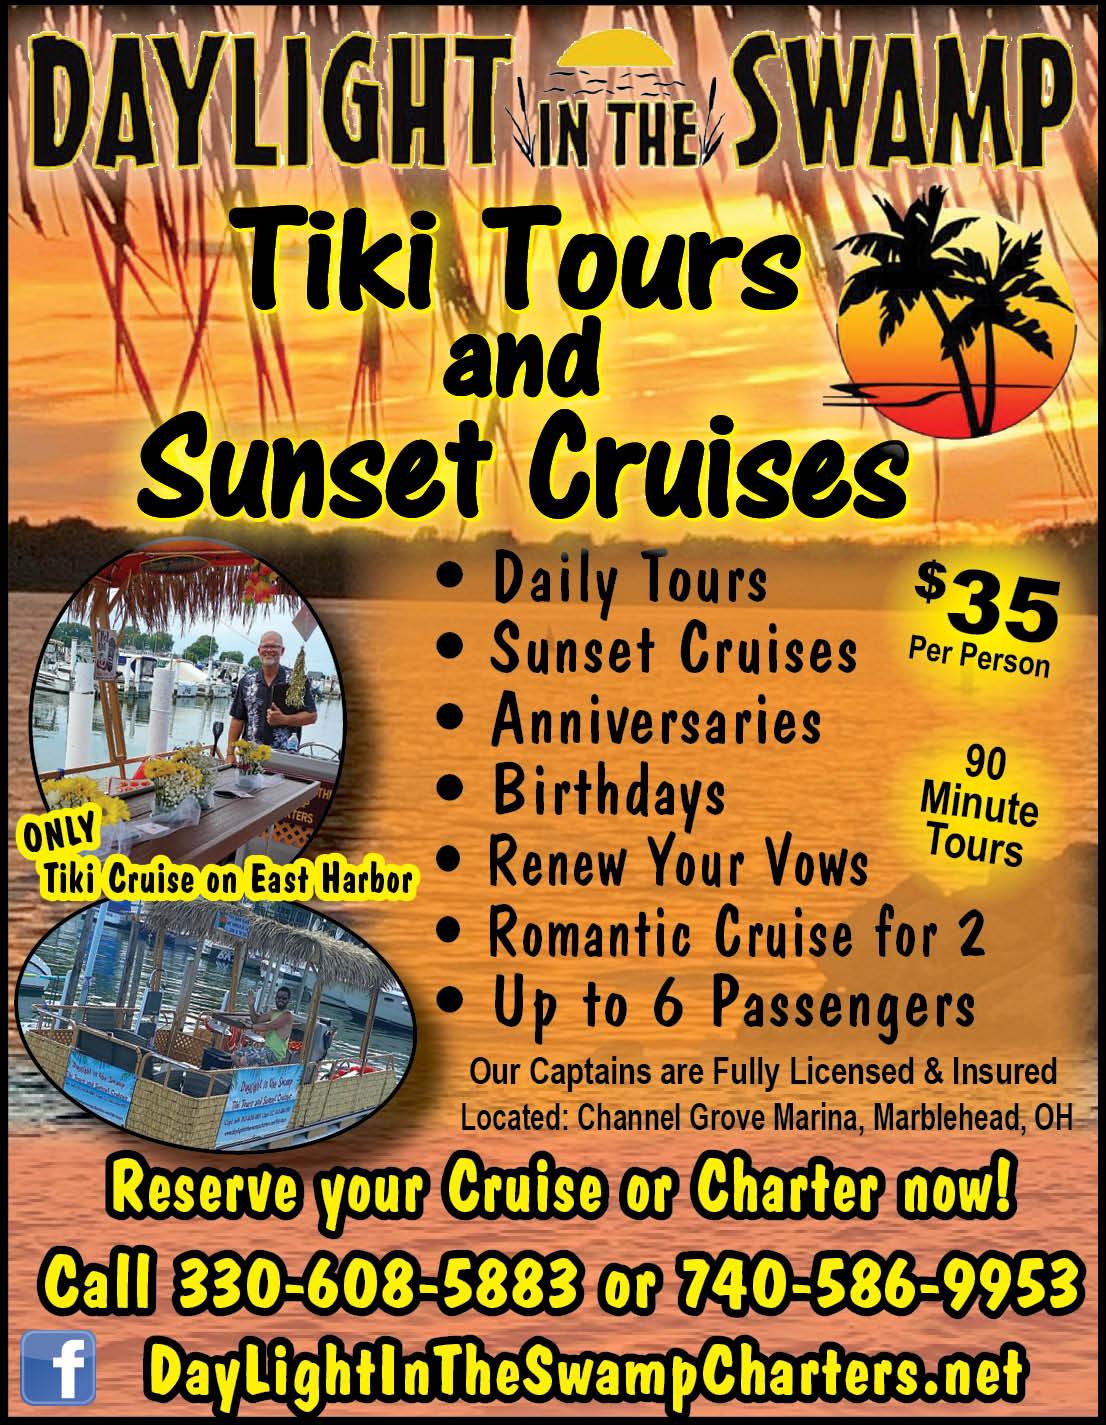 Daylight in the Swamp Tiki Tours and Sunset Cruises